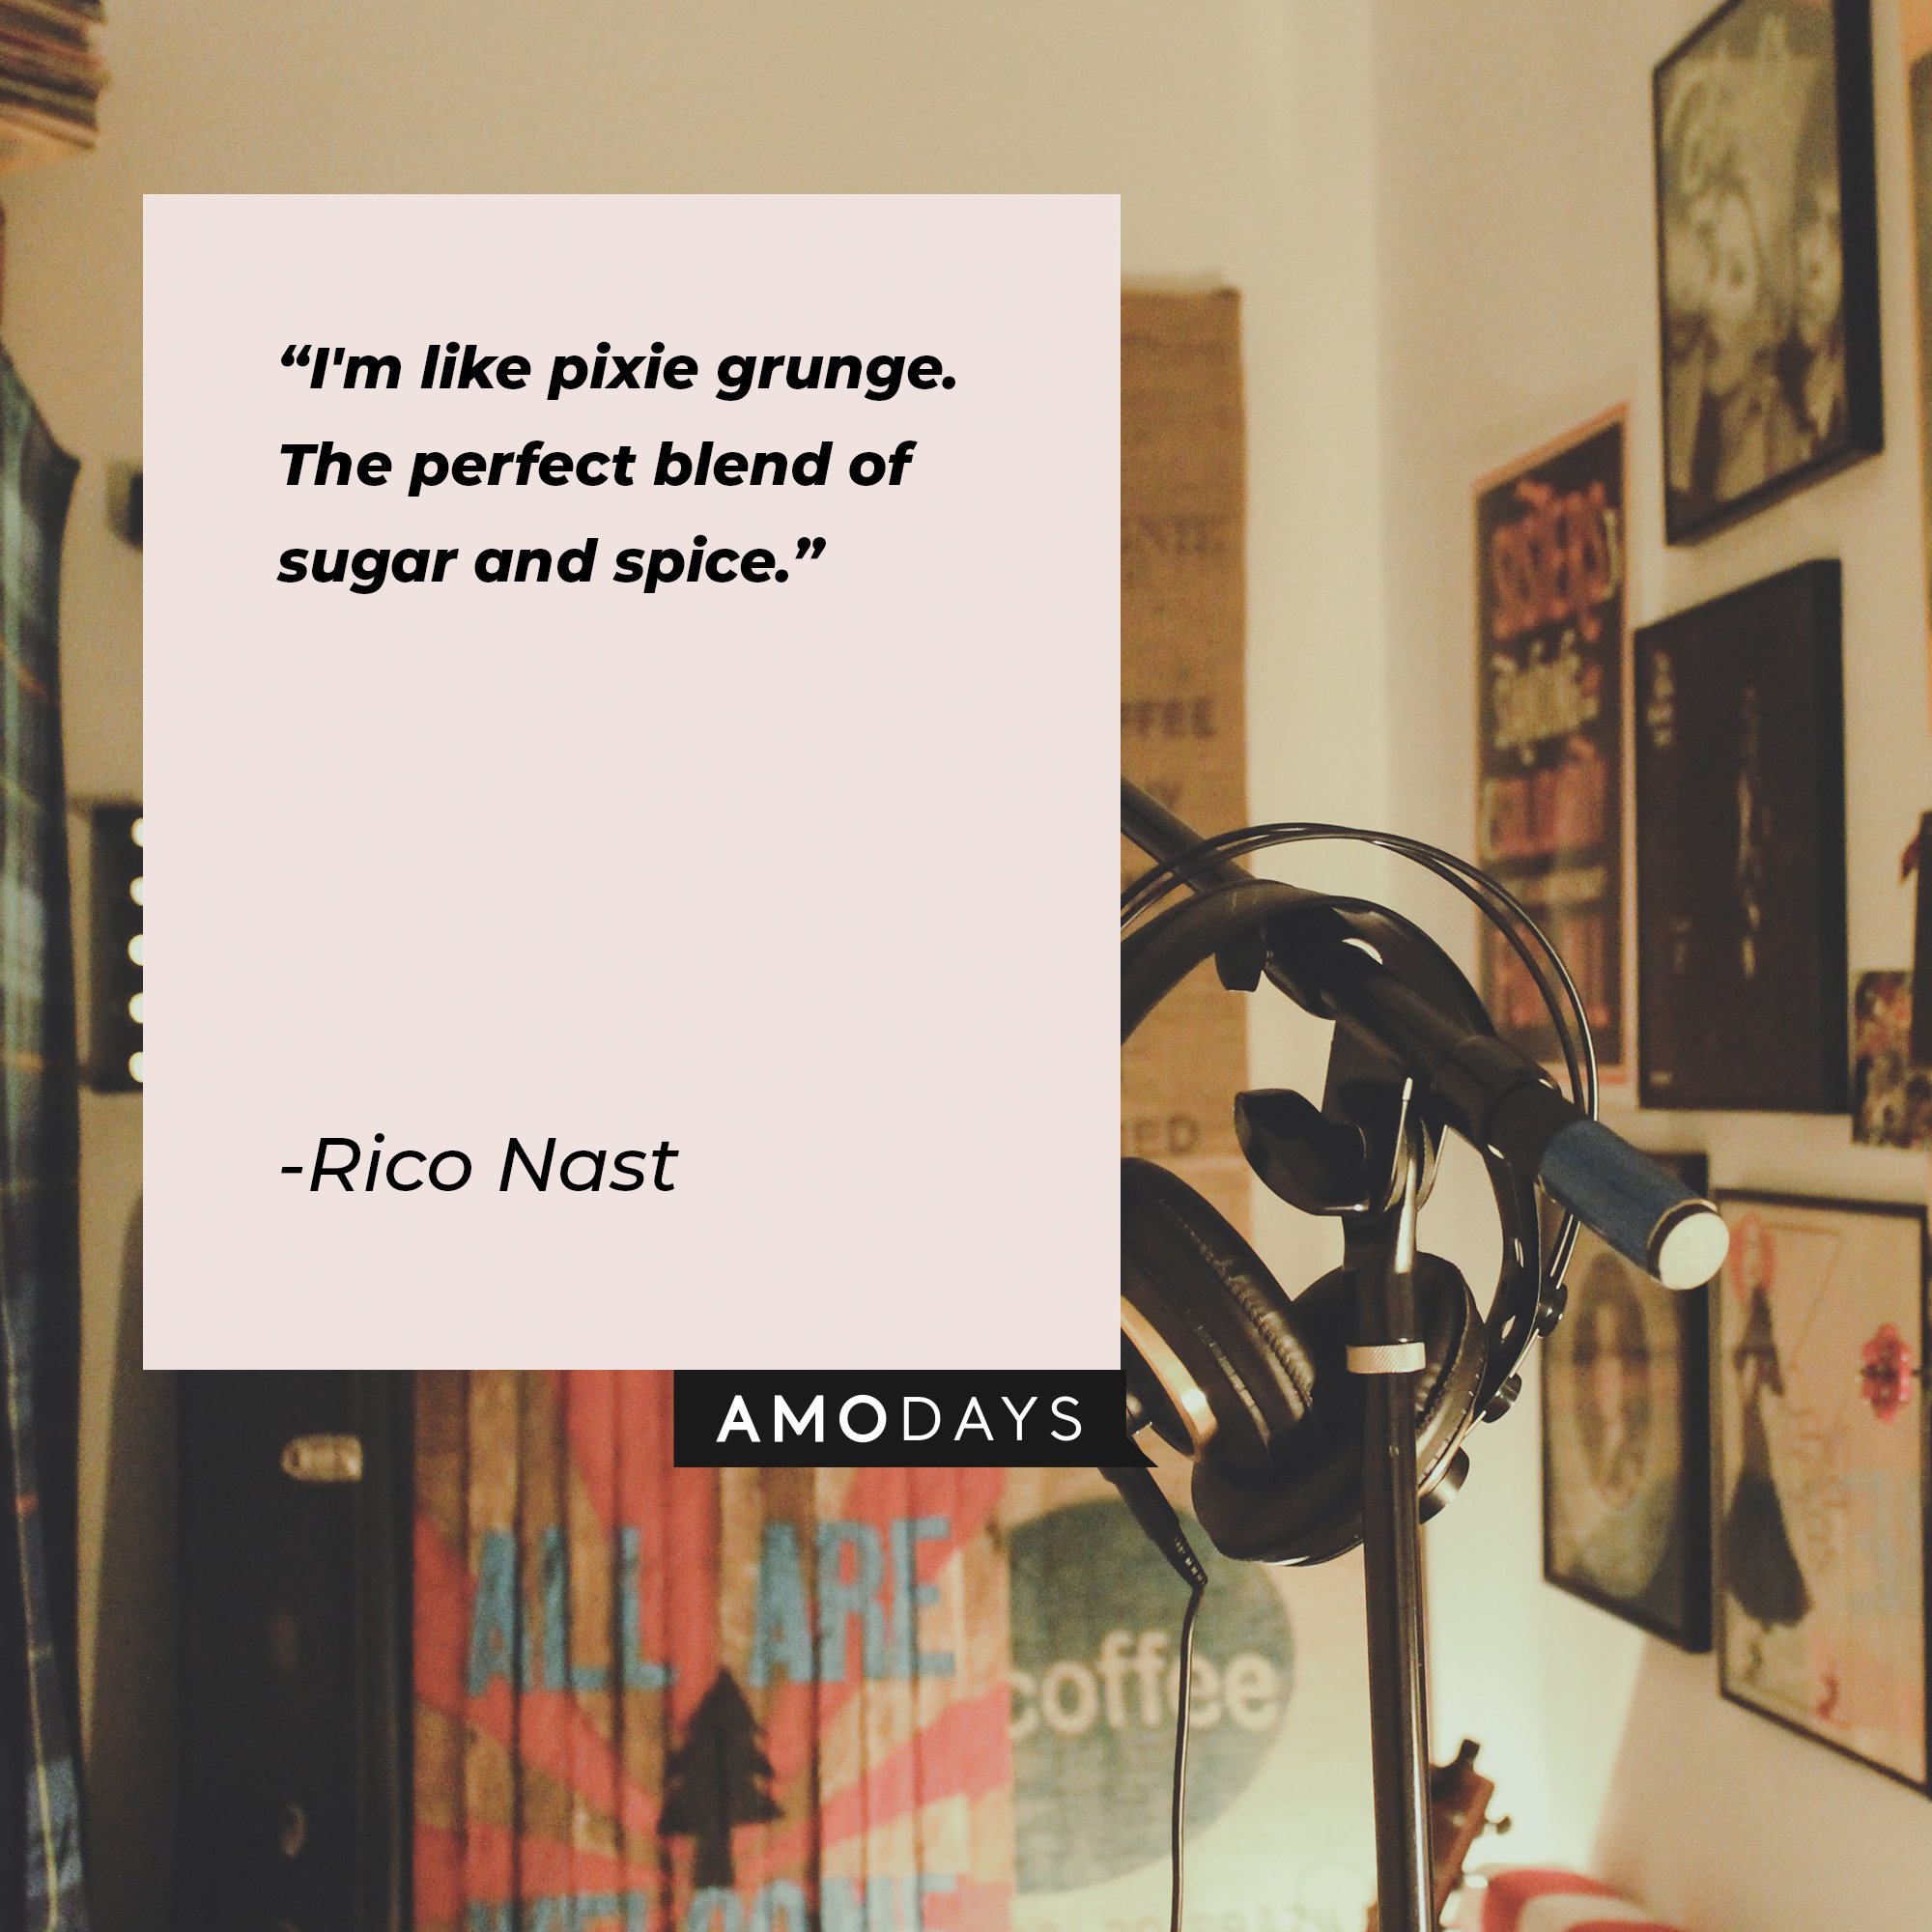 Rico Nast’s quote: "I'm like pixie grunge. The perfect blend of sugar and spice." | Image: AmoDays